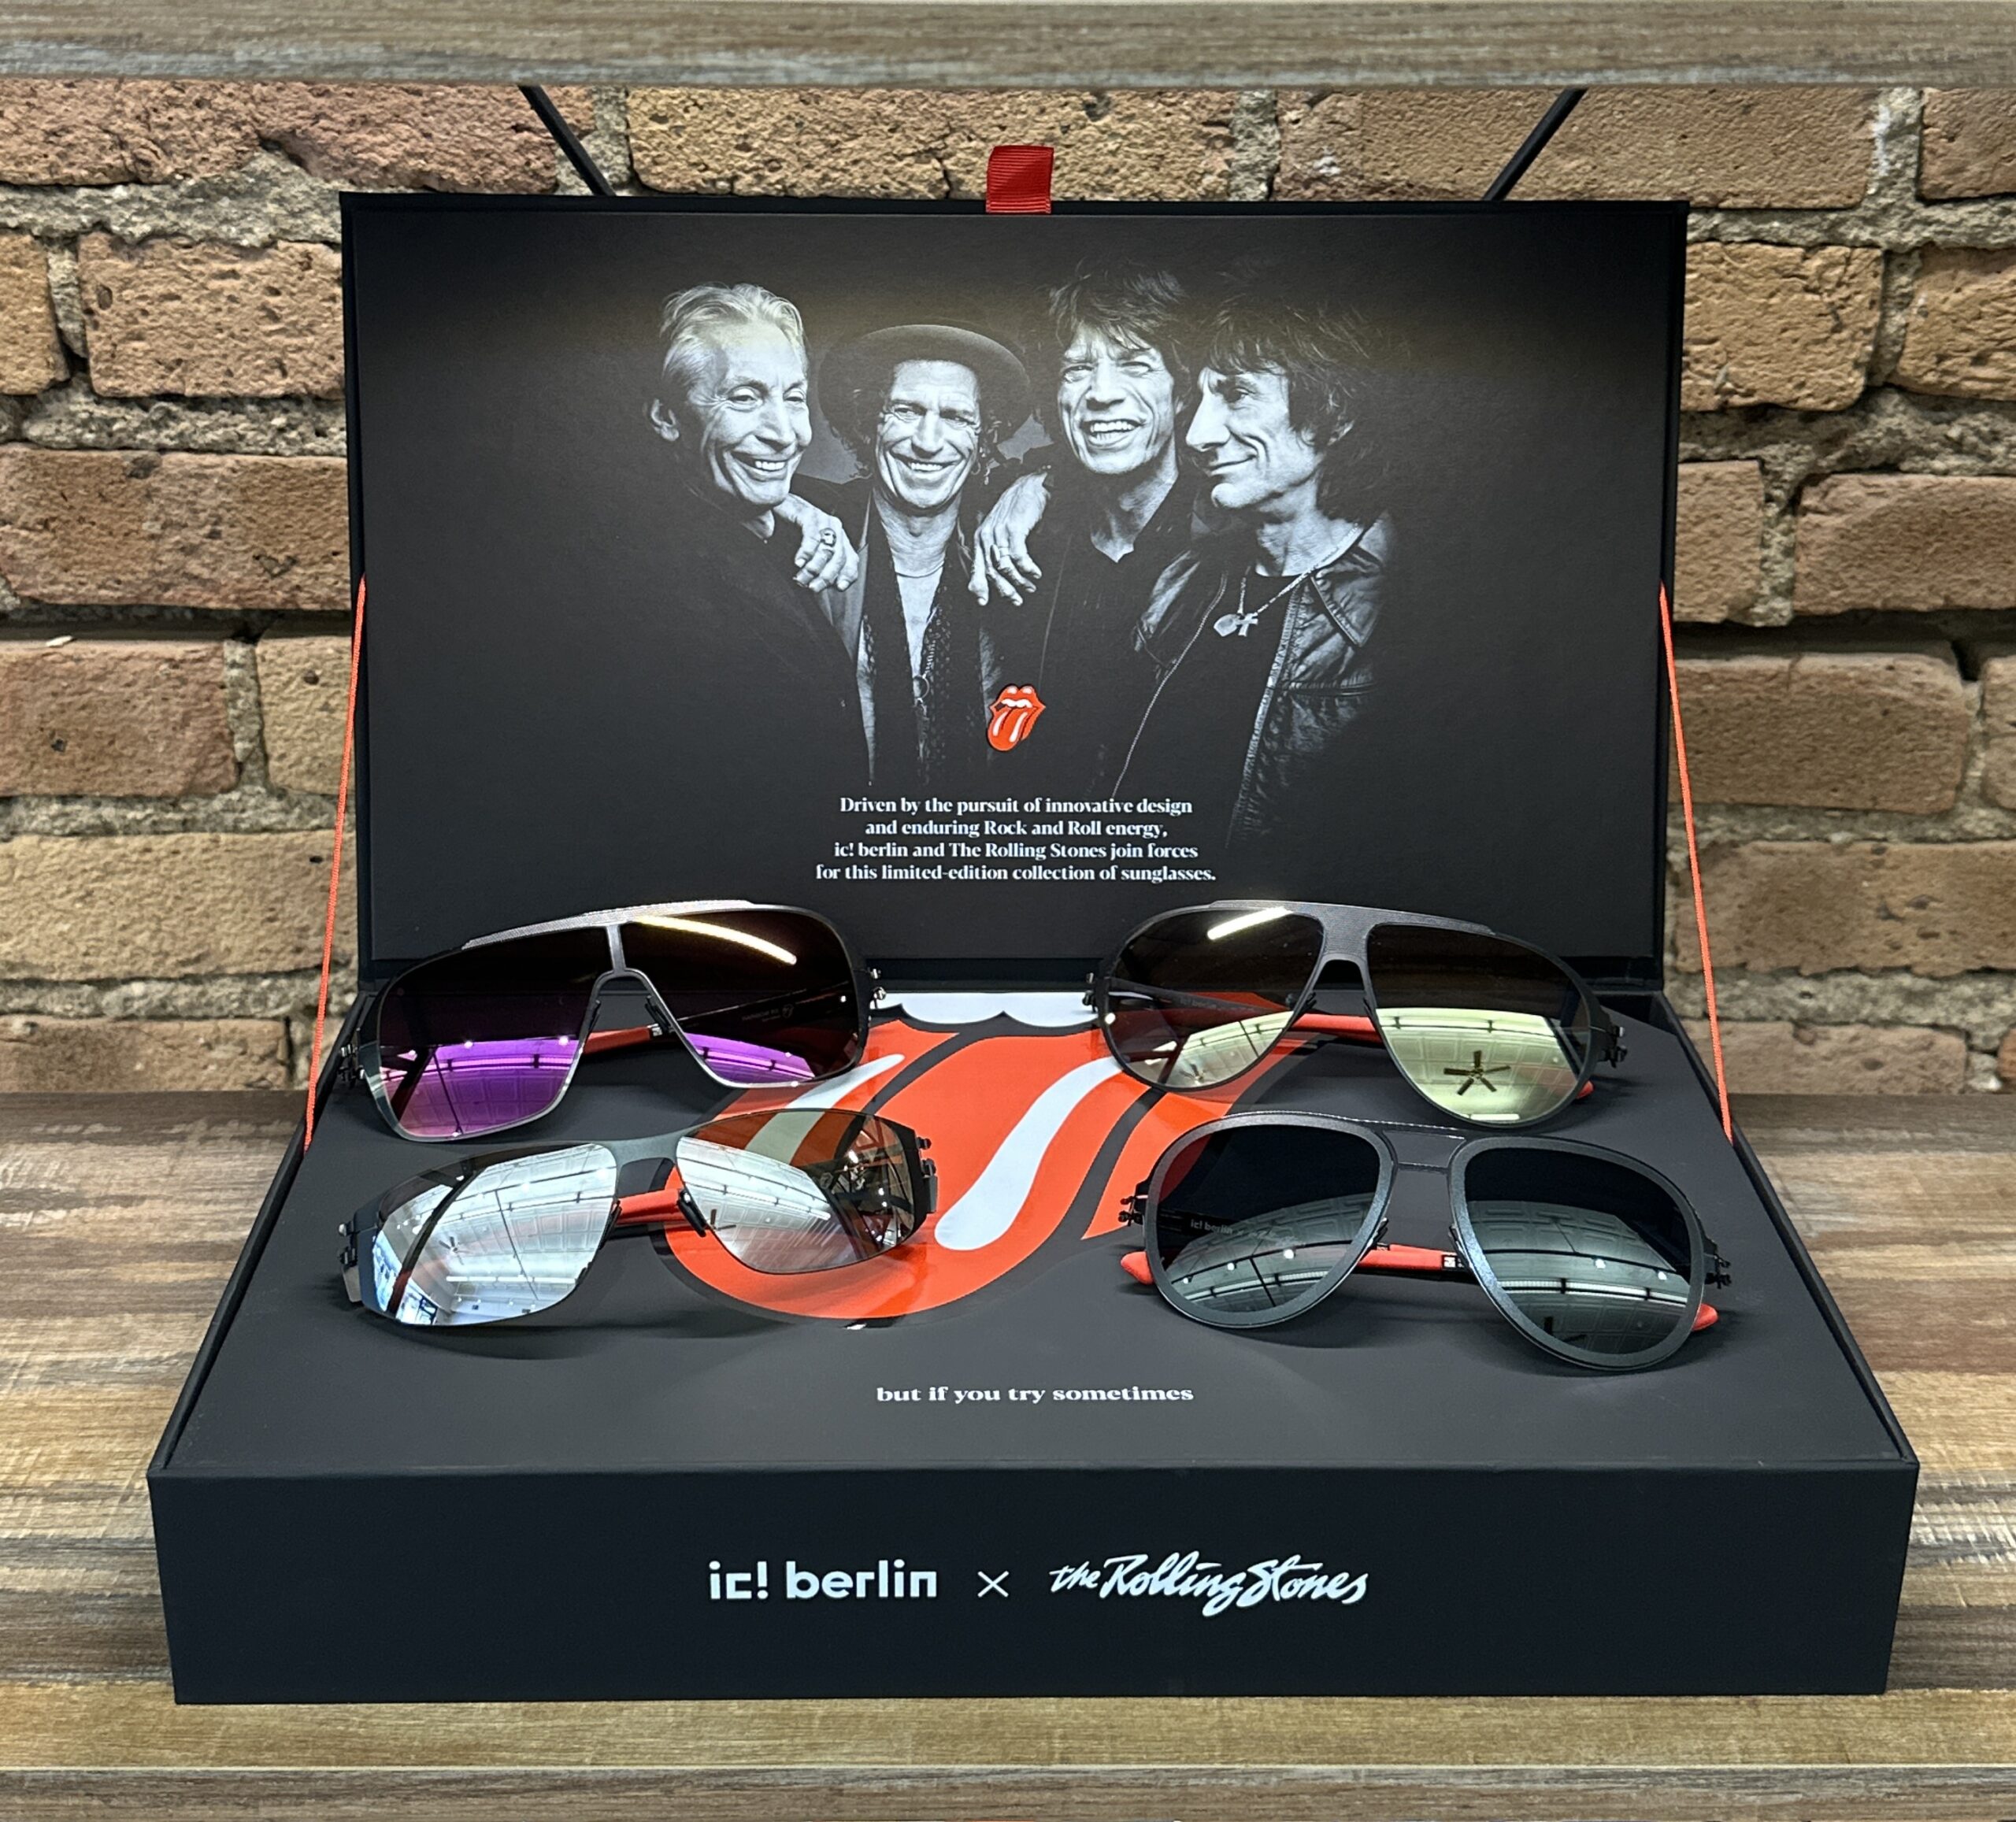 sunglasses display with four pairs of sunglasses and a photo of The Rolling Stones band members.